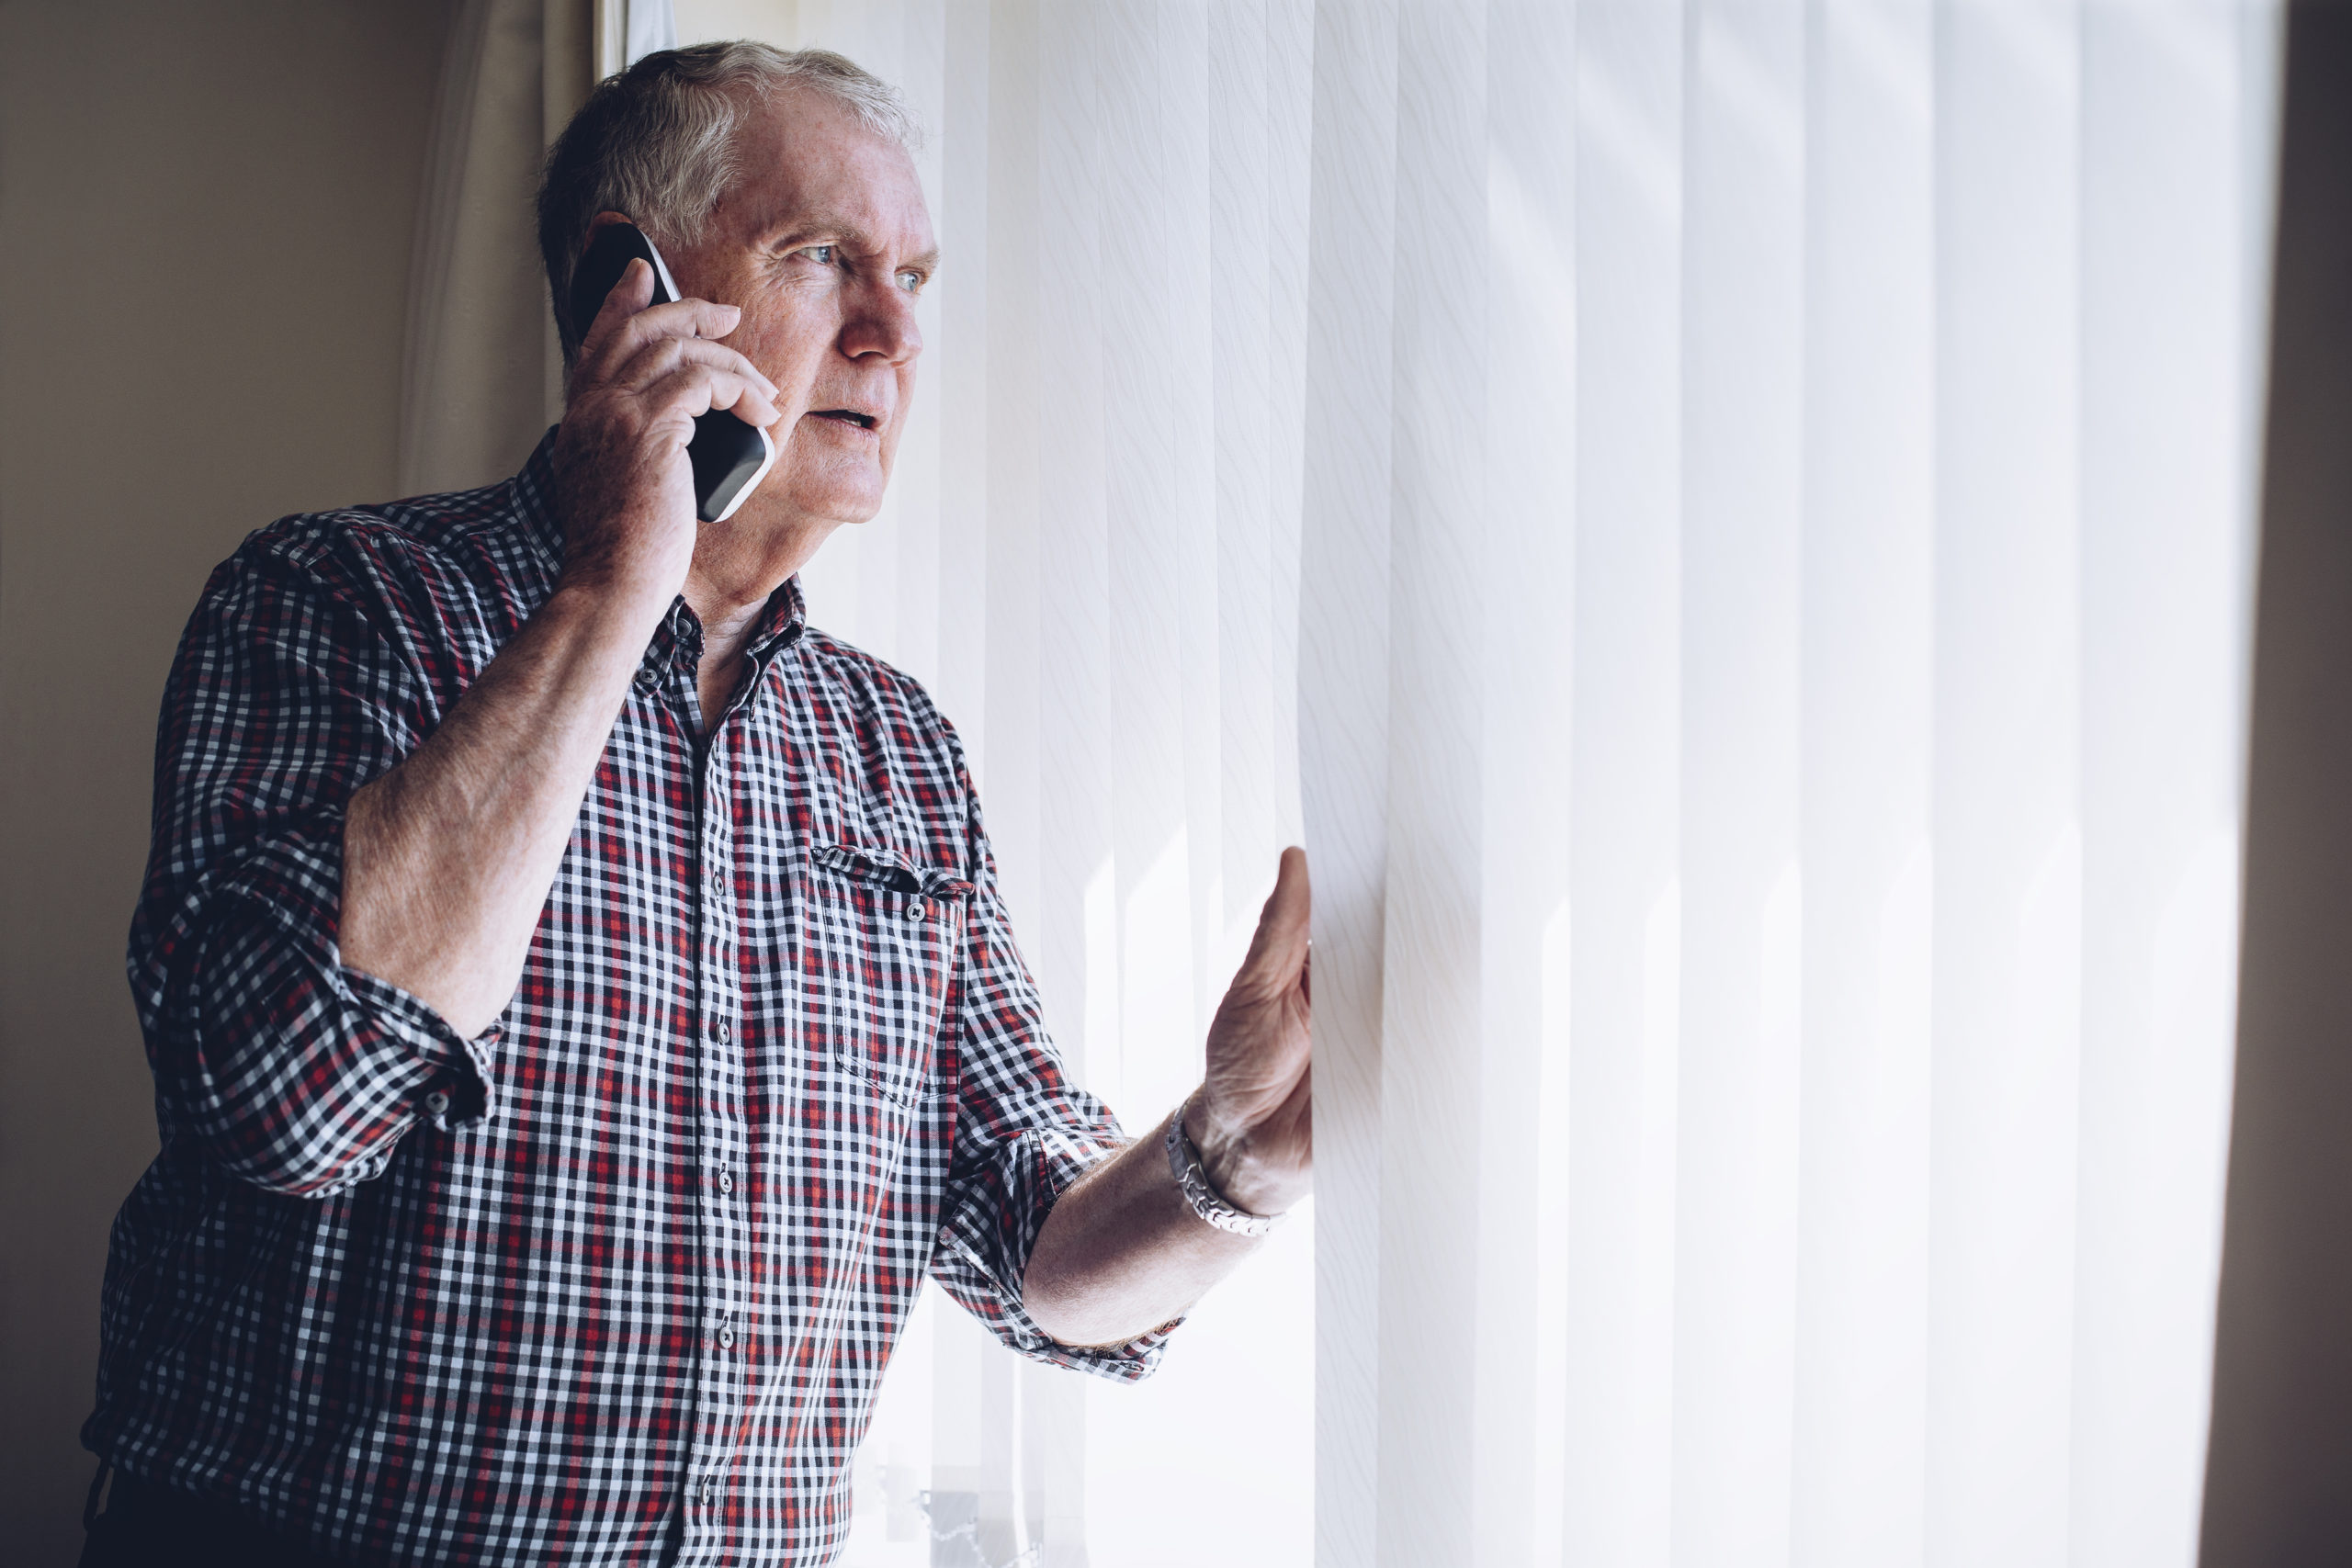 Senior man talking on the phone whilst looking out of his window. He has a worried look on his face.